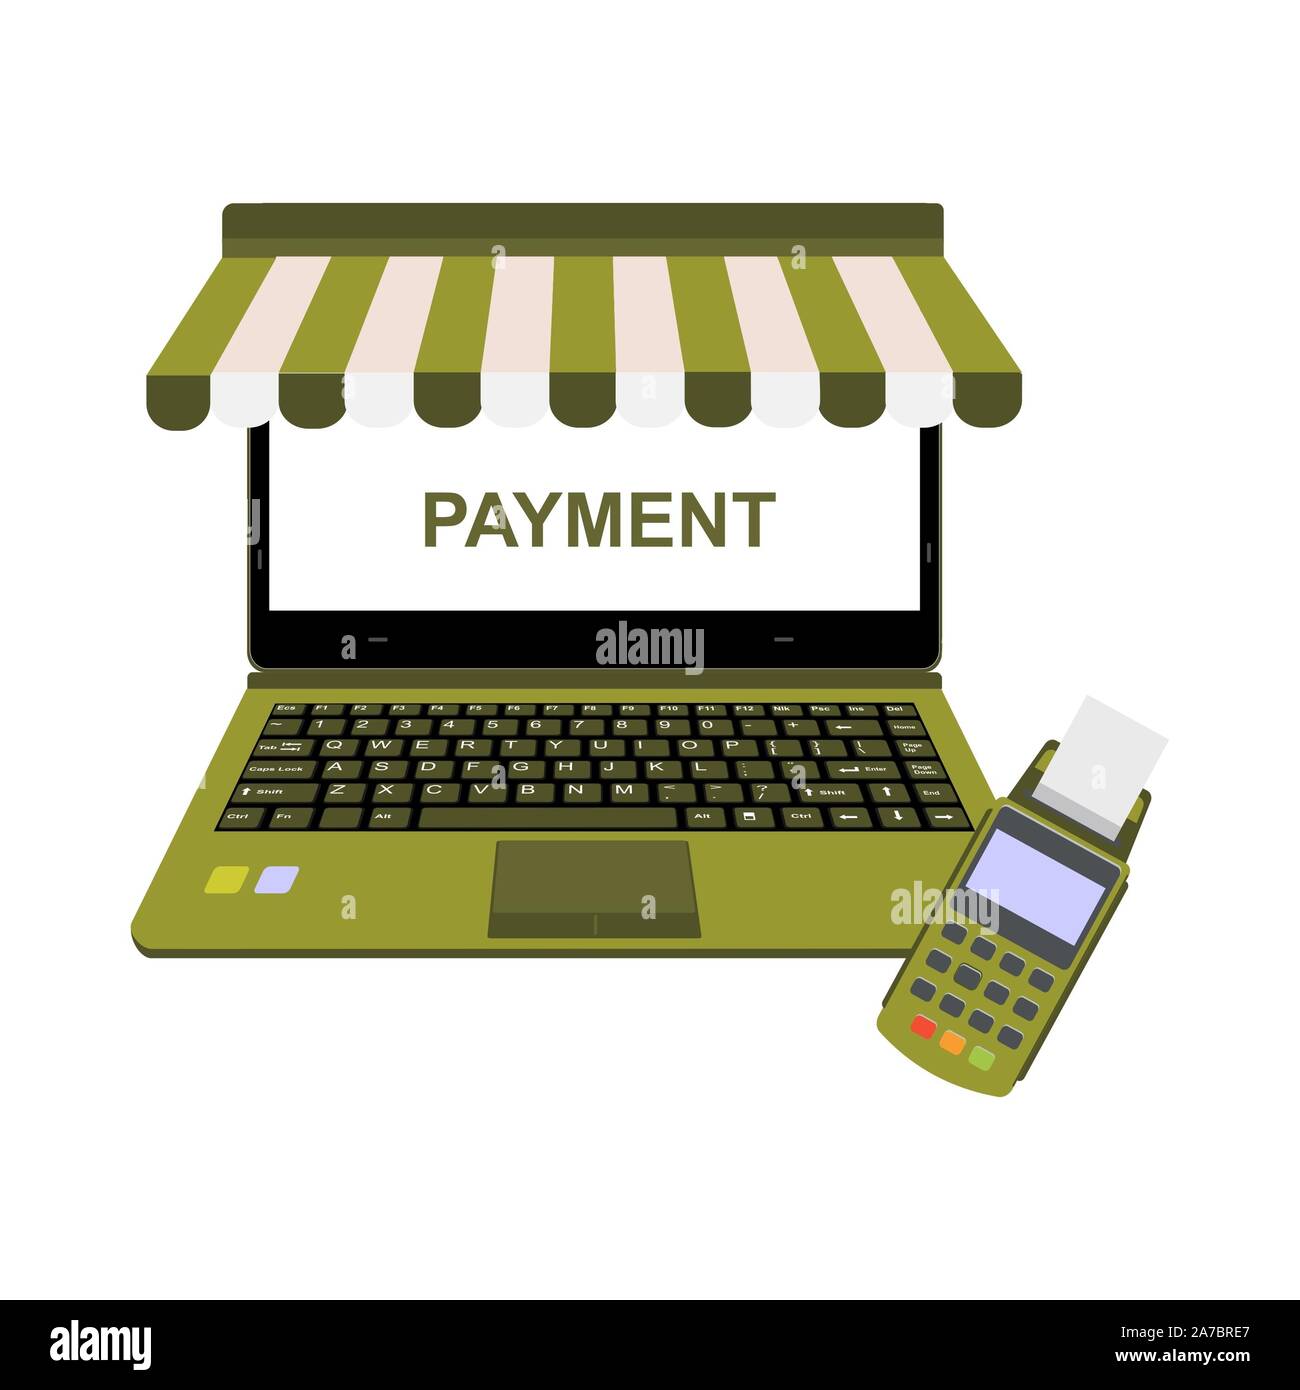 Laptop Vector For Online Shop Payment With Edc Machine Stock Photo Alamy